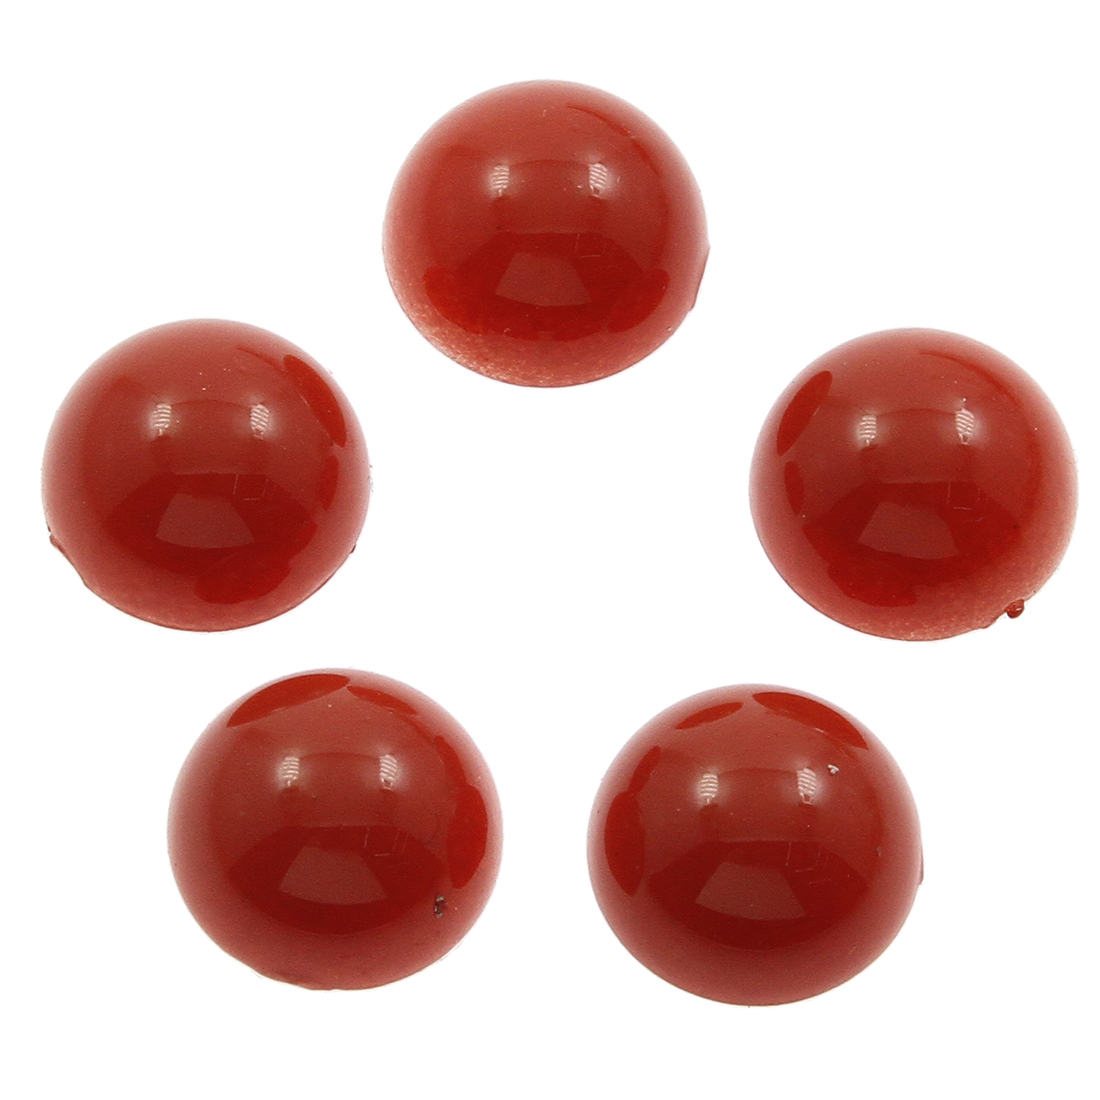  red